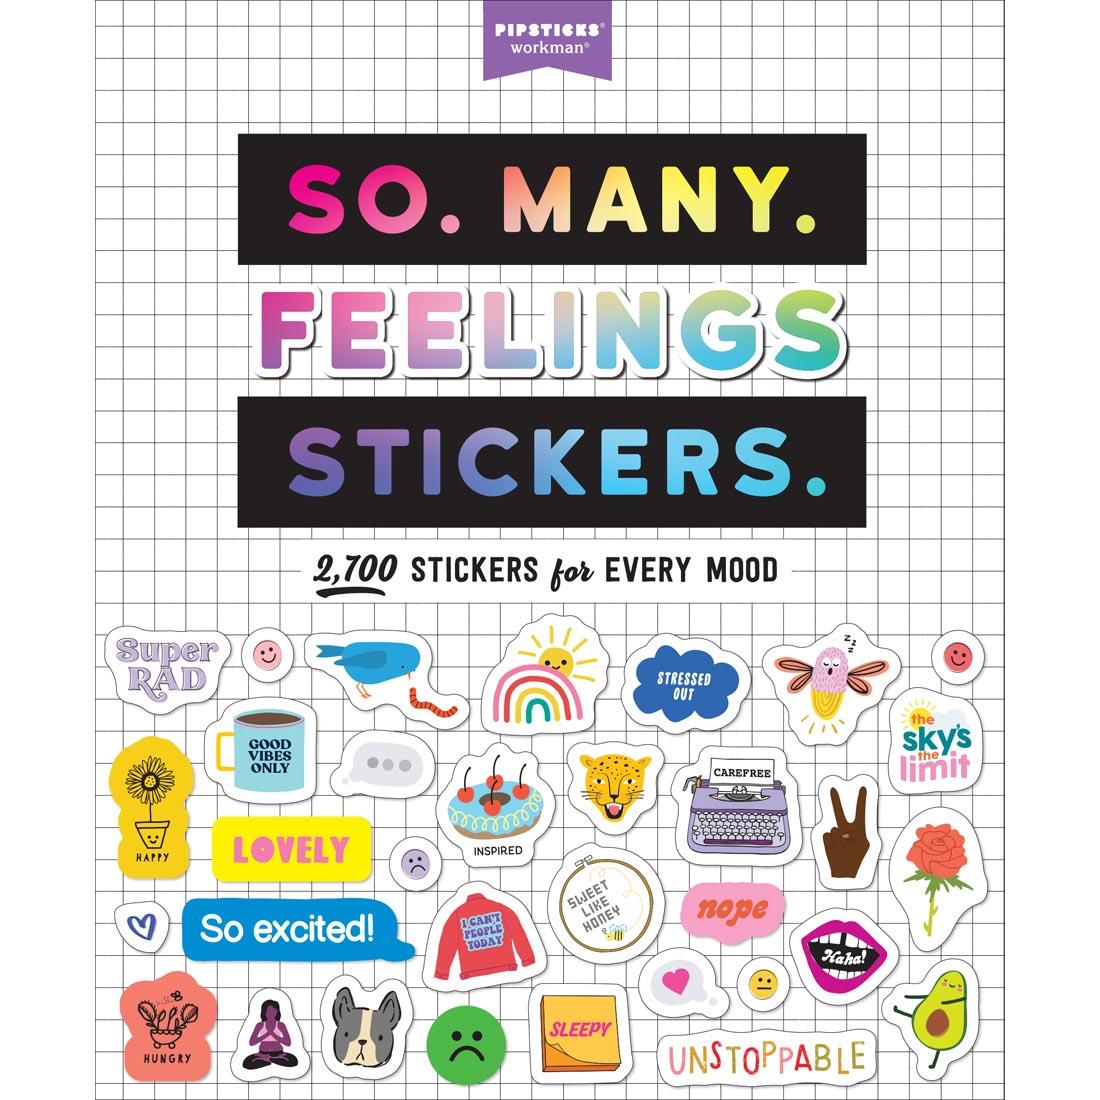 Front cover of So Many Feelings Stickers By Pipsticks and Workman